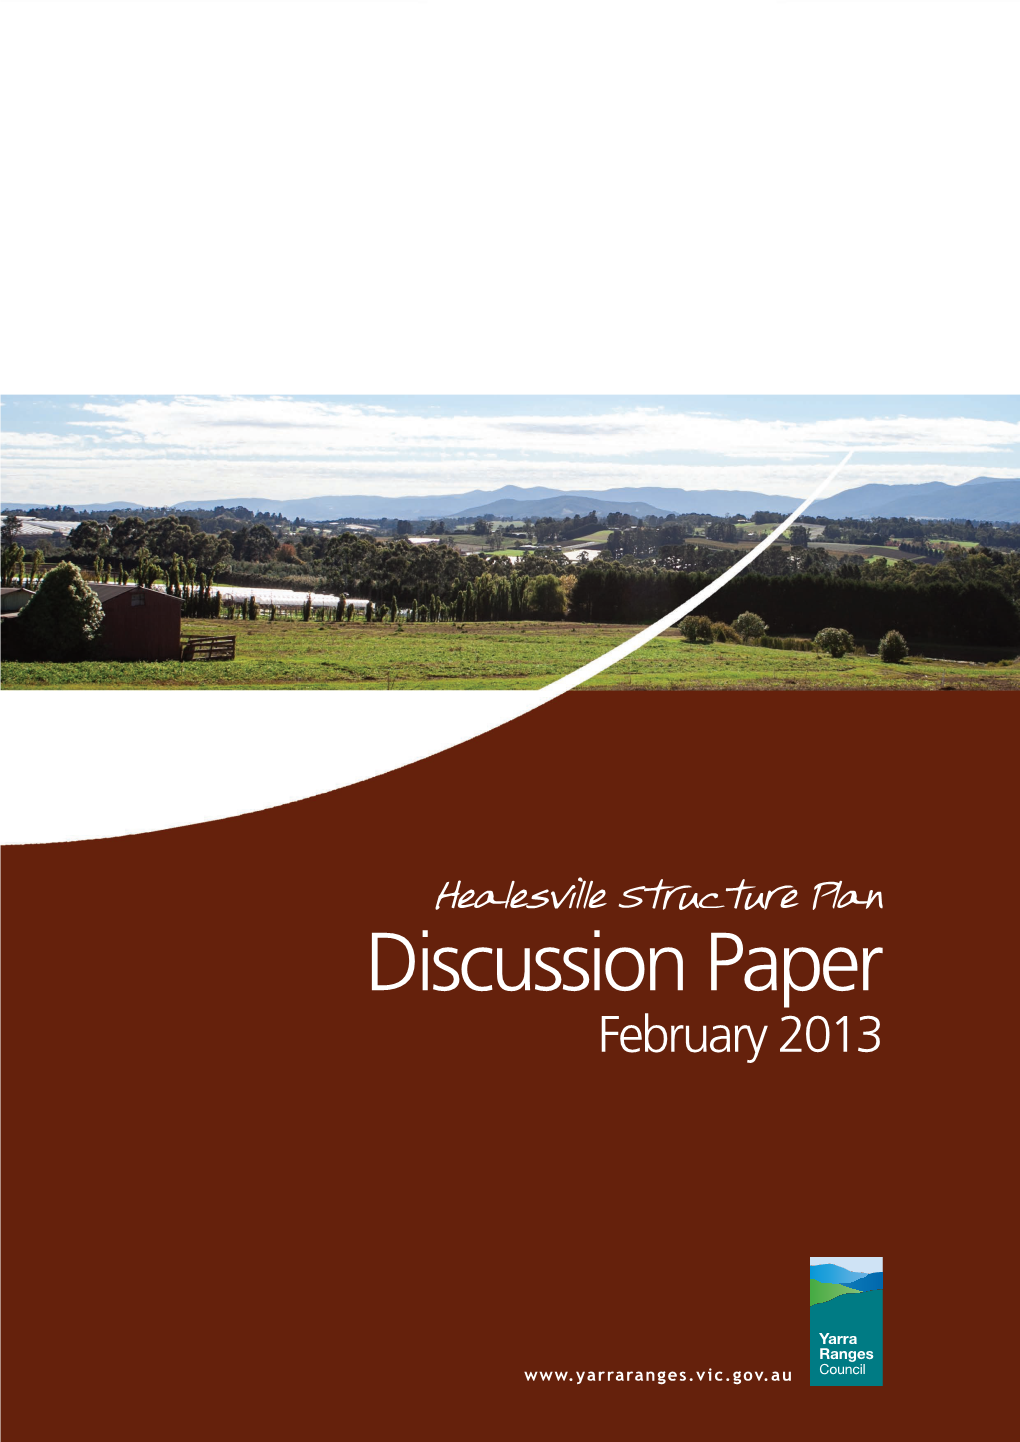 Healesville Structure Plan Discussion Paper February 2013